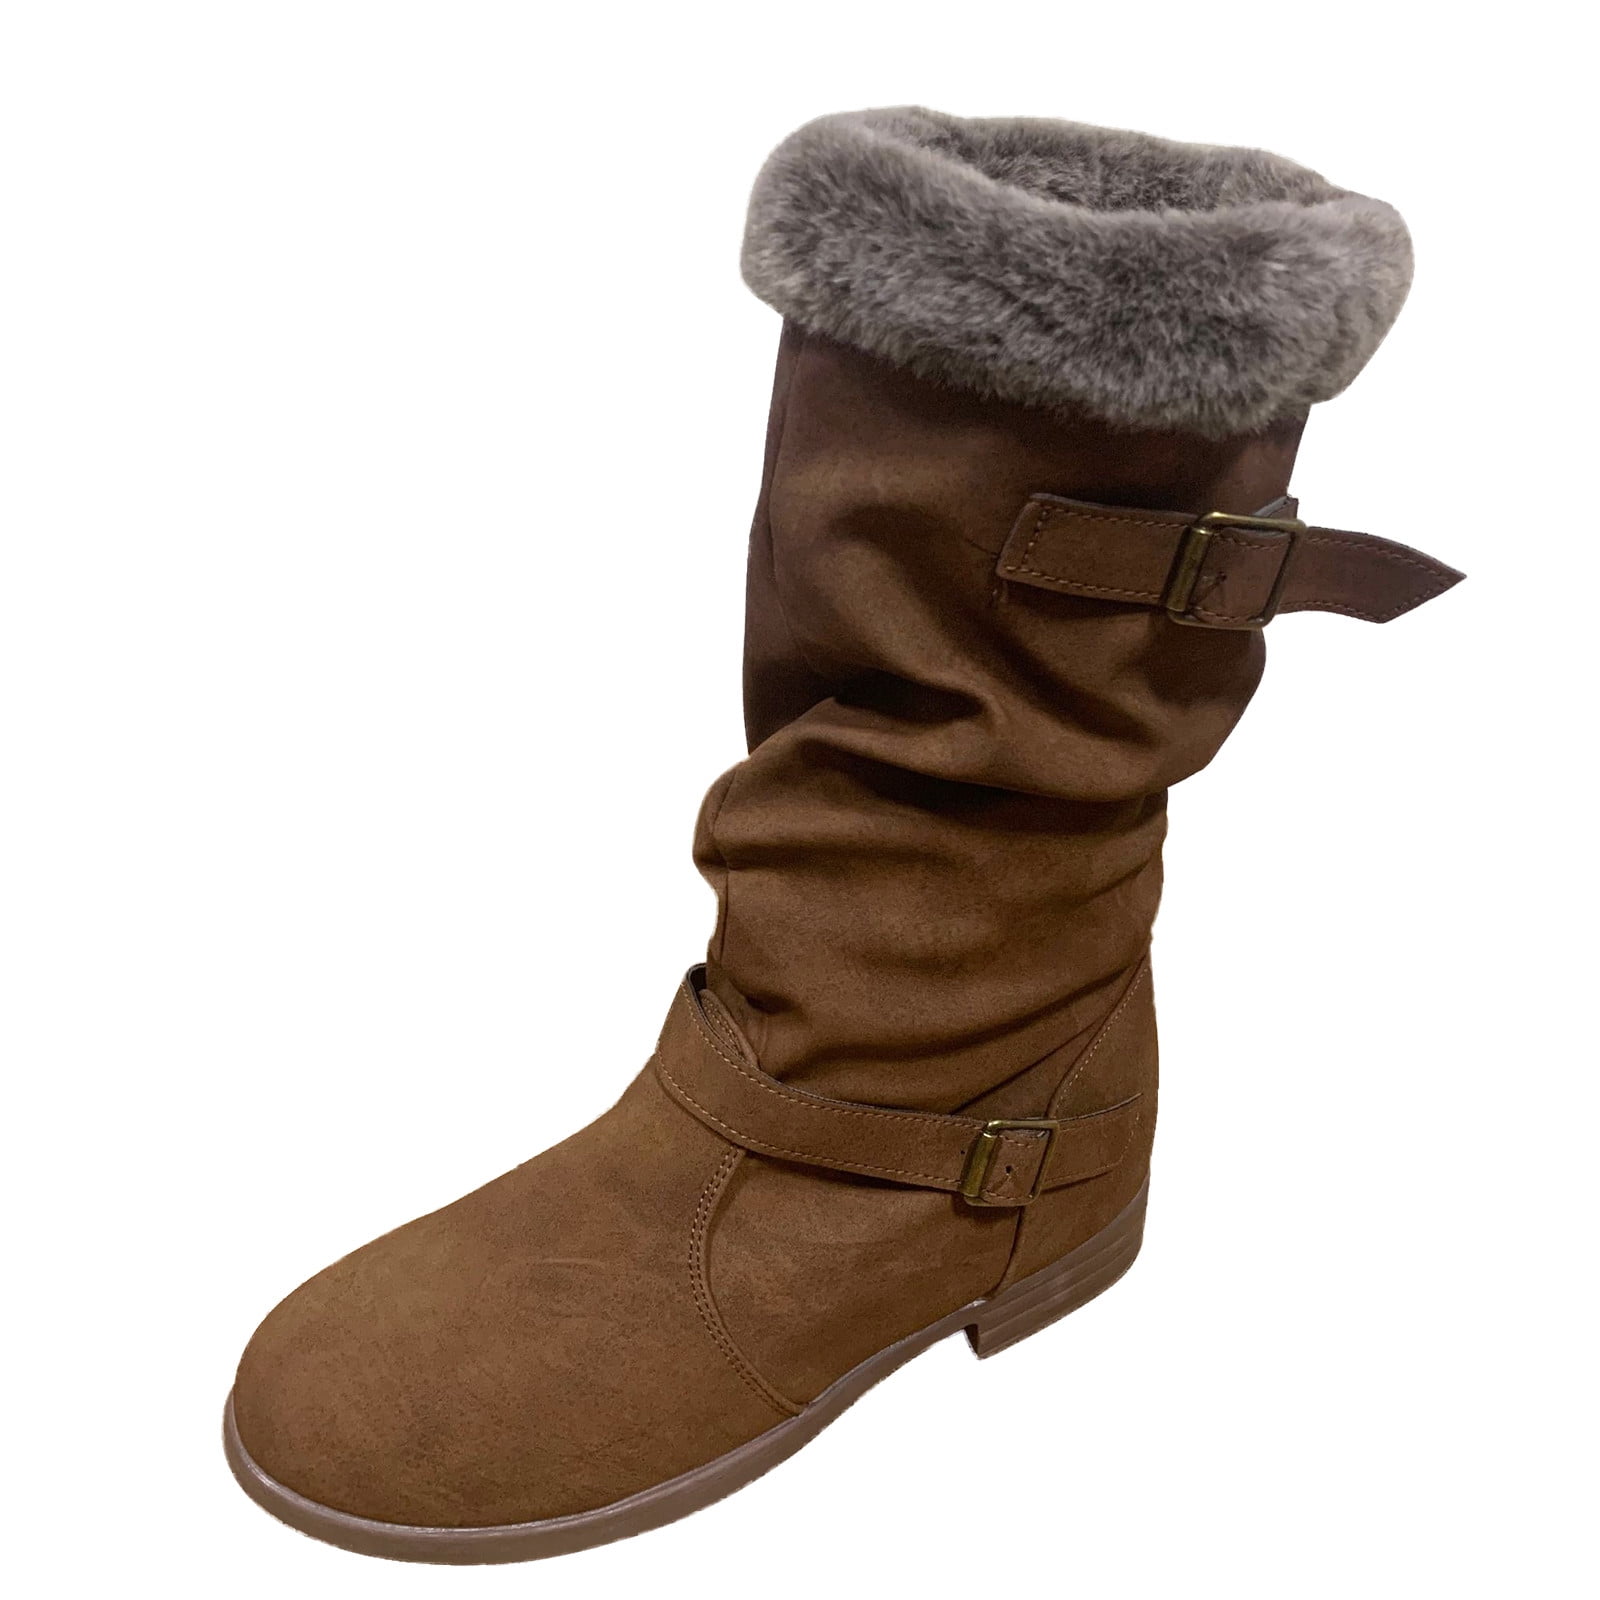 Puntoco Women'S Winter Boots Clearance,Women'S Winter Warm Middle Ankle ...